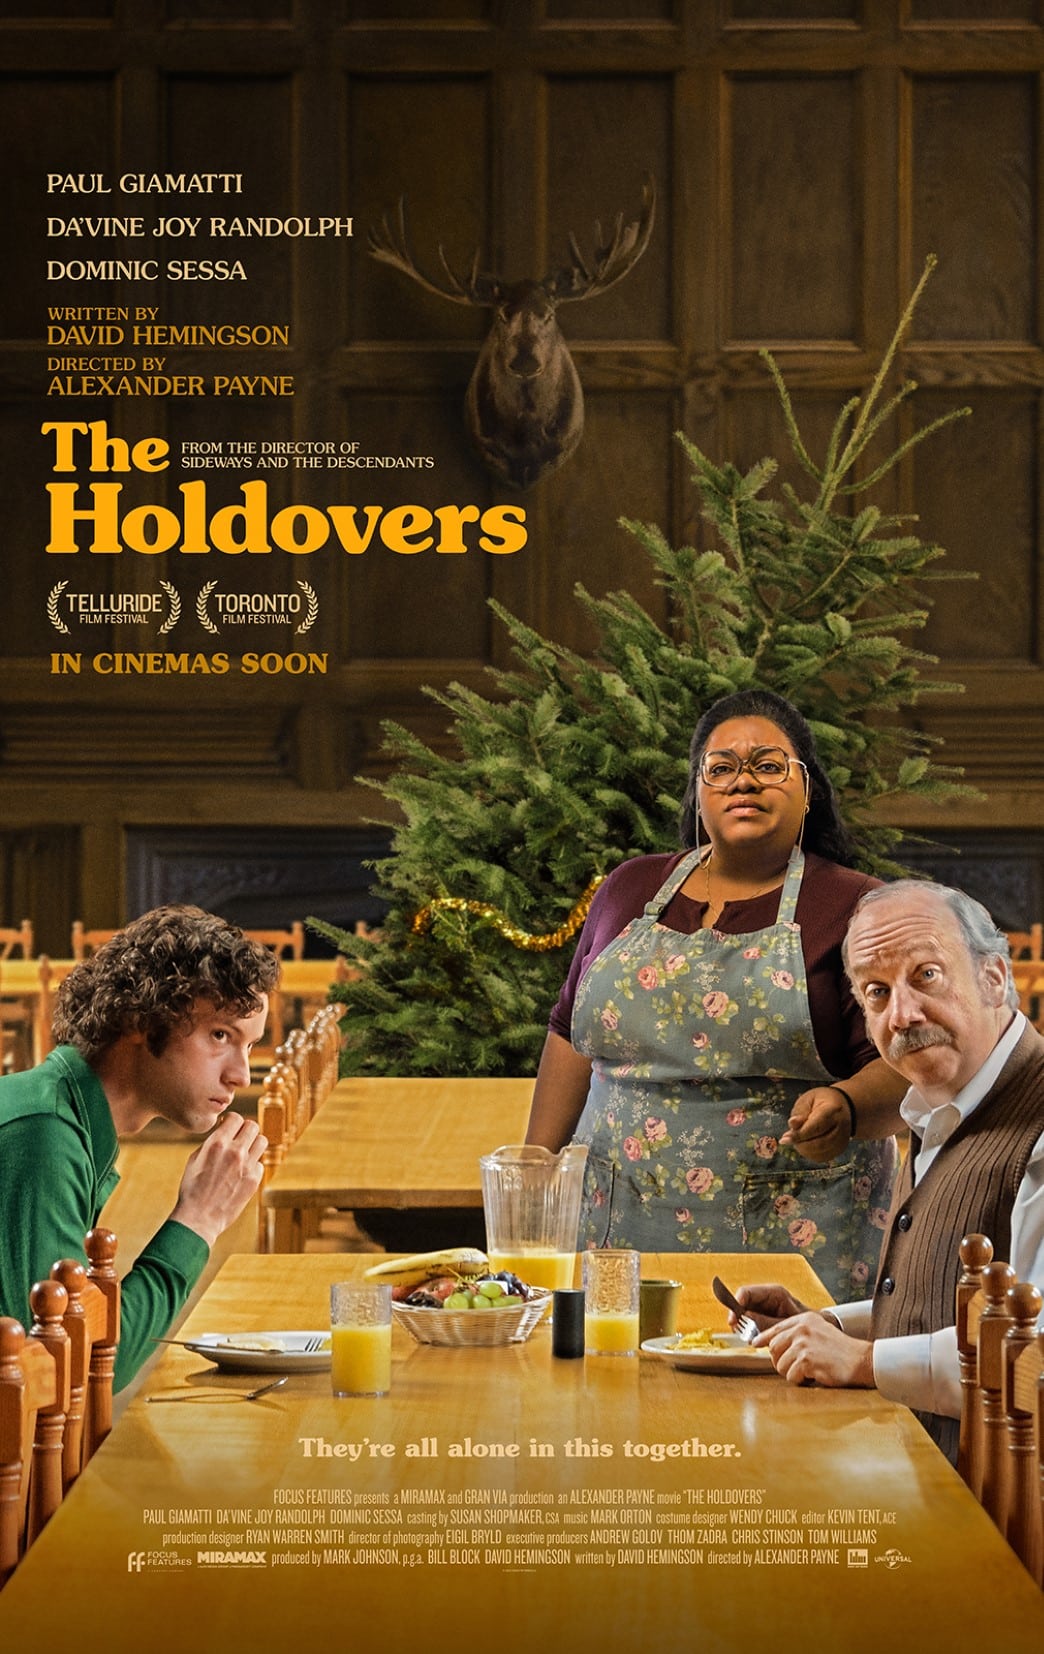 A poster for the holdovers with two people sitting at a table.